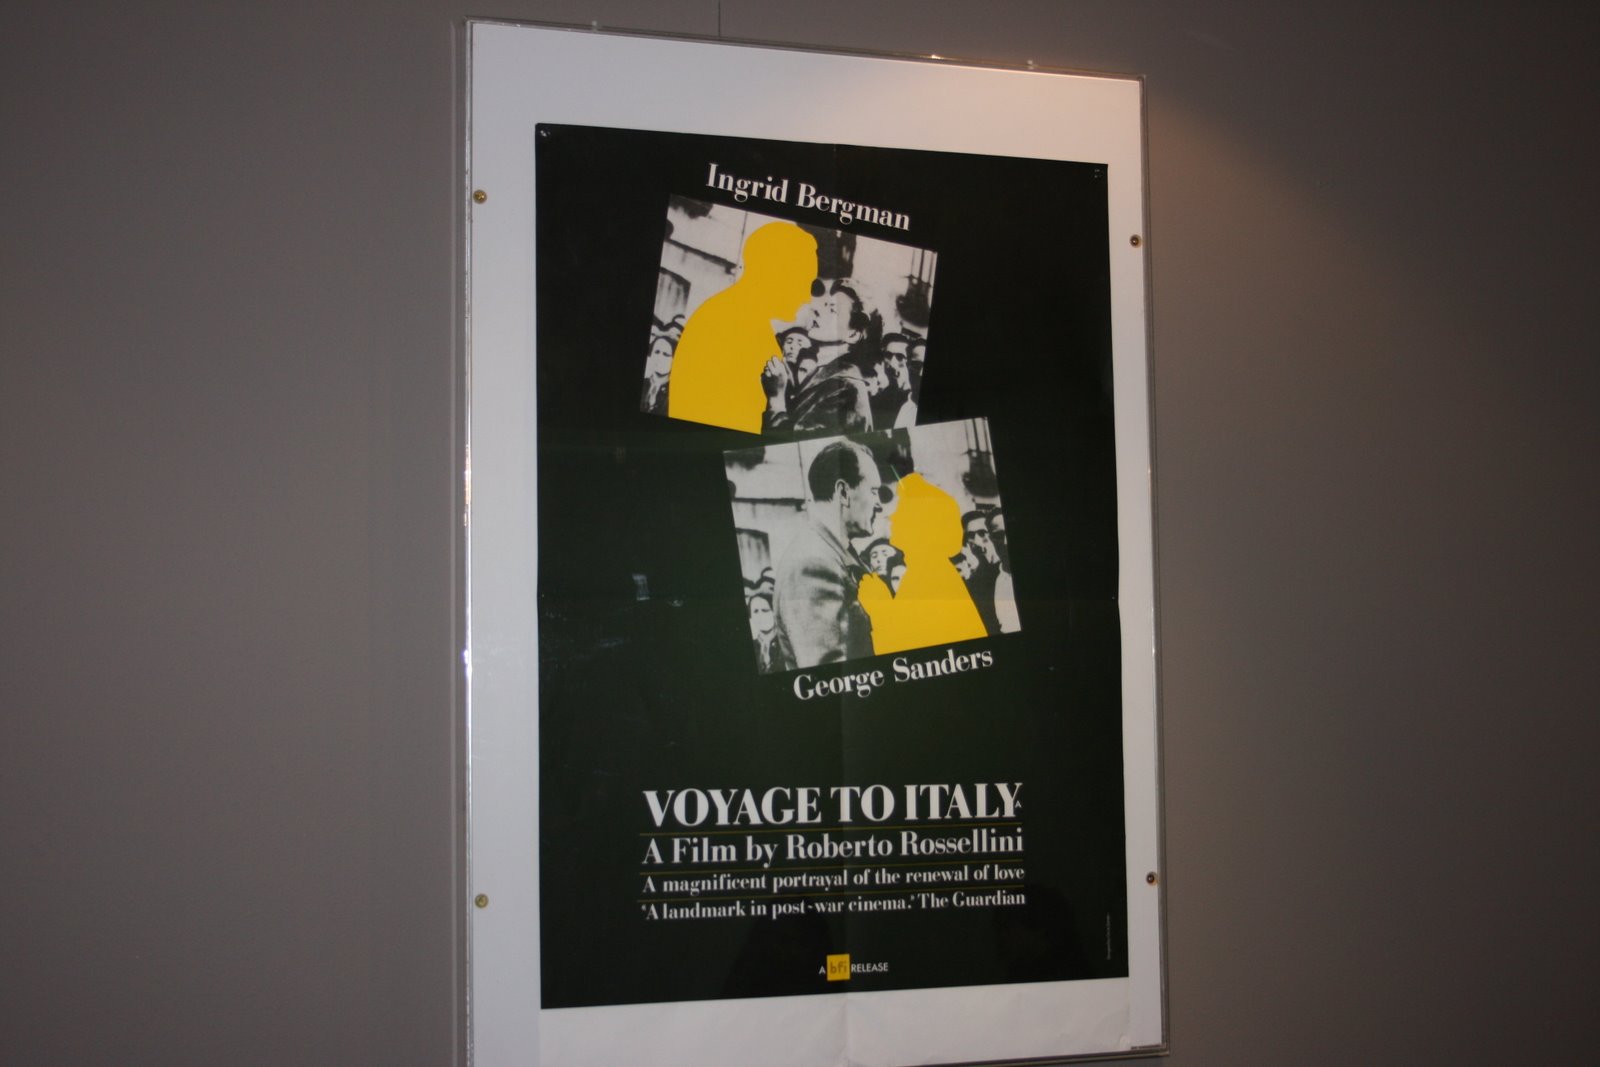 [Voyage+to+Italy+(Rosselini)+re-release+poster,+NFT.JPG]